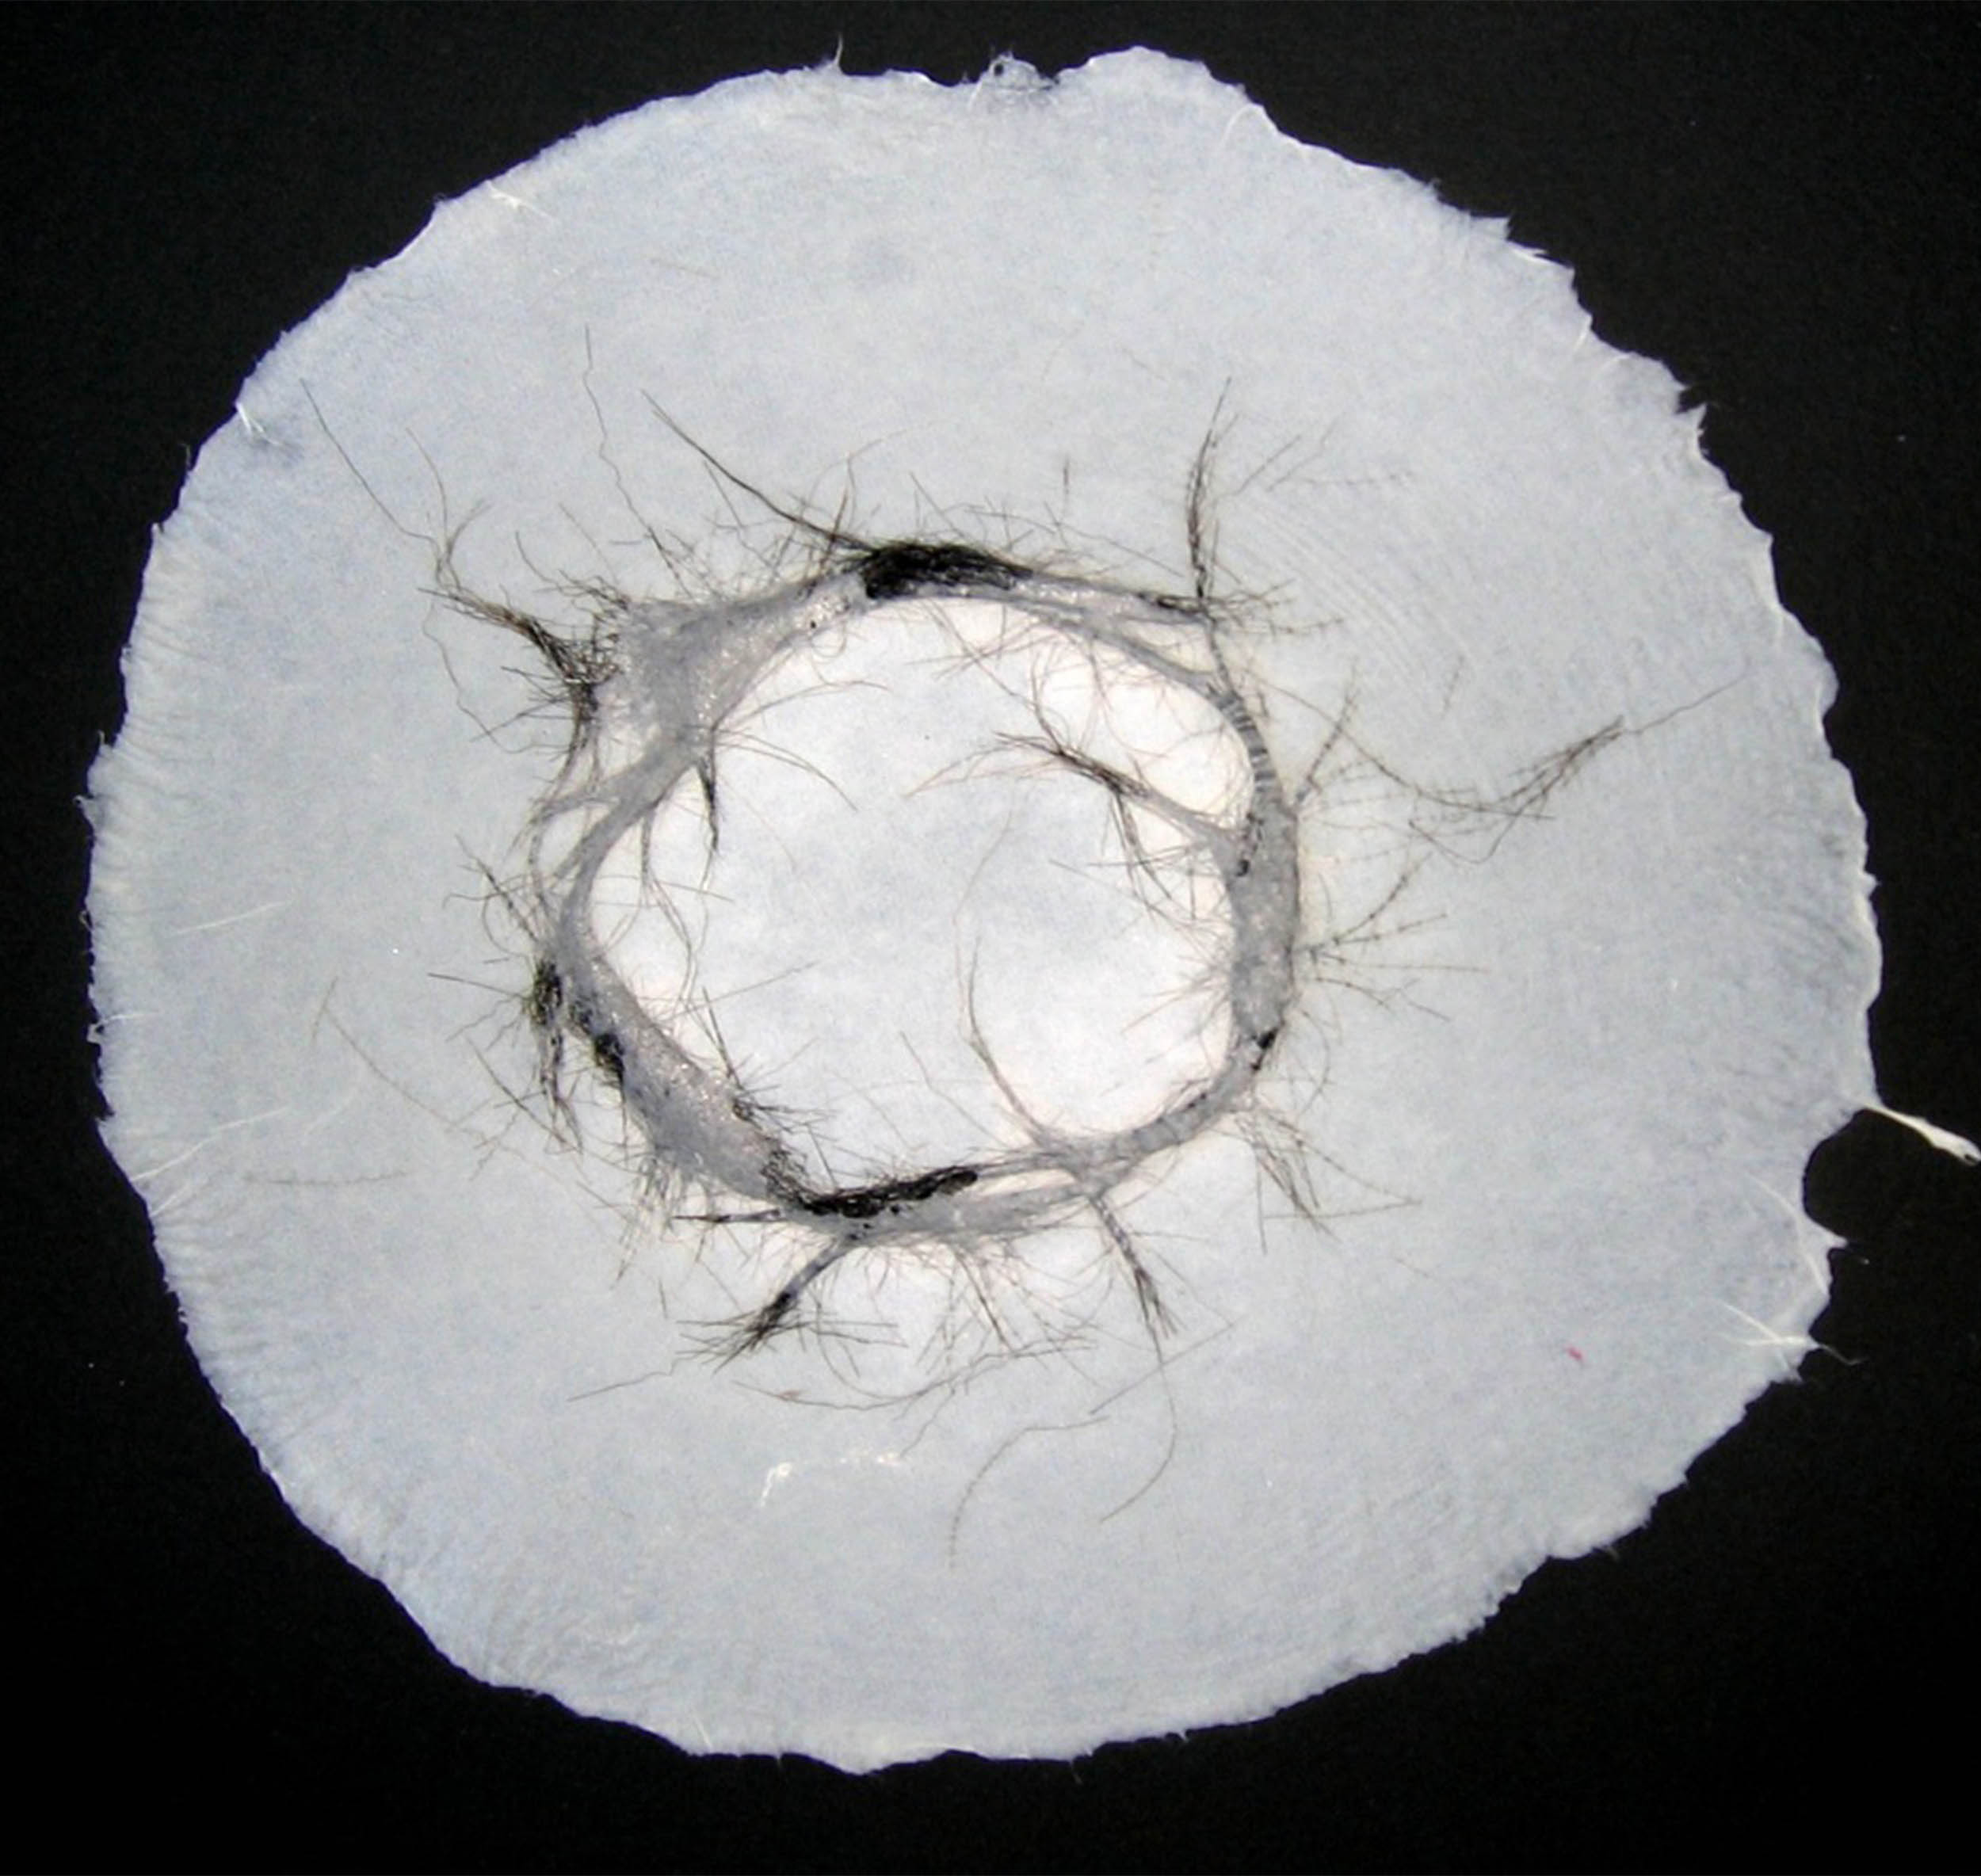 Artwork comprised of a disk of pressed pulp and human hair.